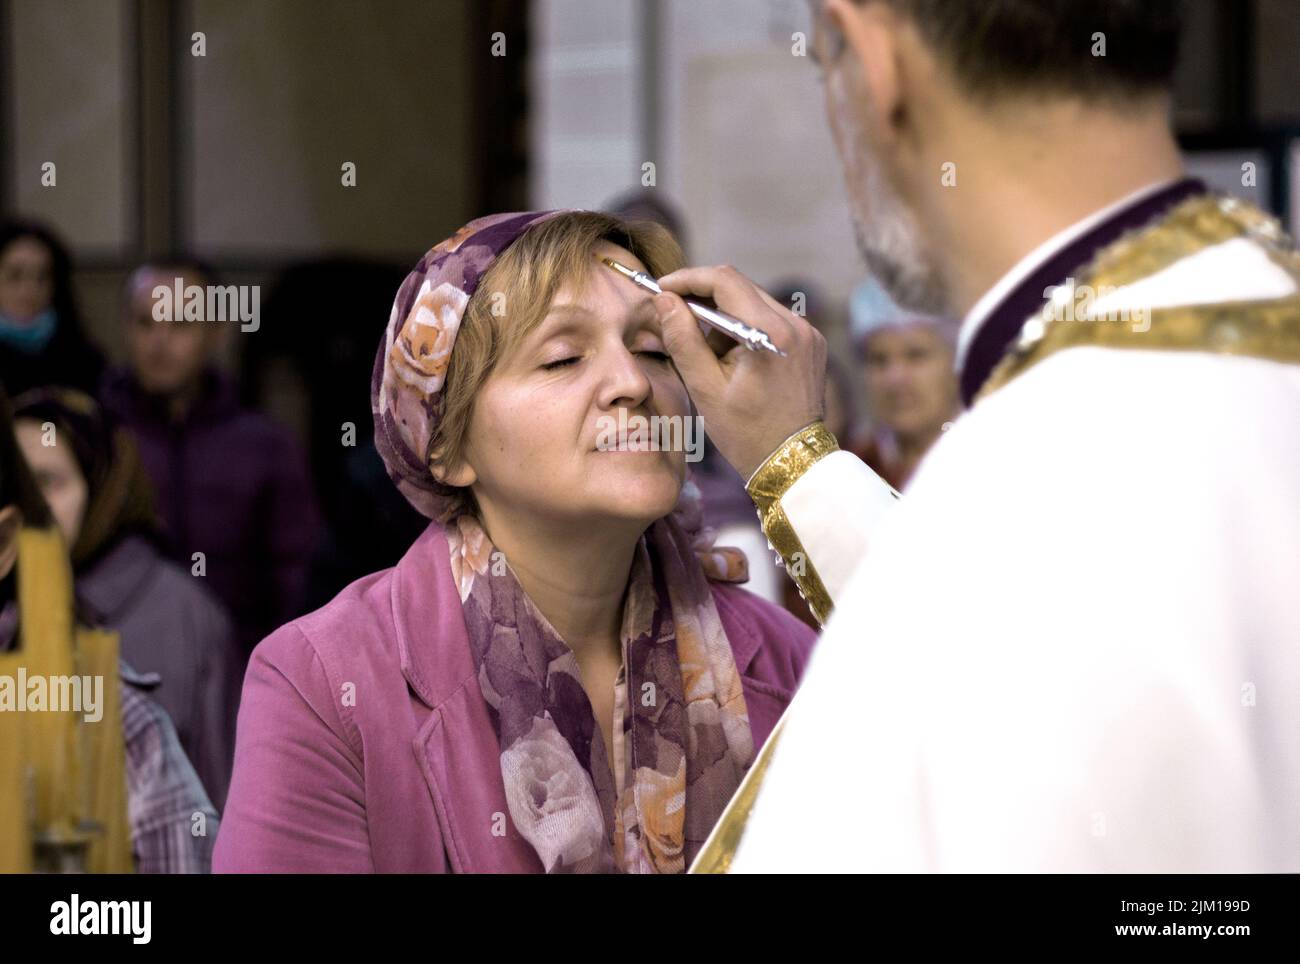 Sarajevo, Bosnia. A Serbian woman receives a blessing from a priest during Orthodox Easter. Stock Photo